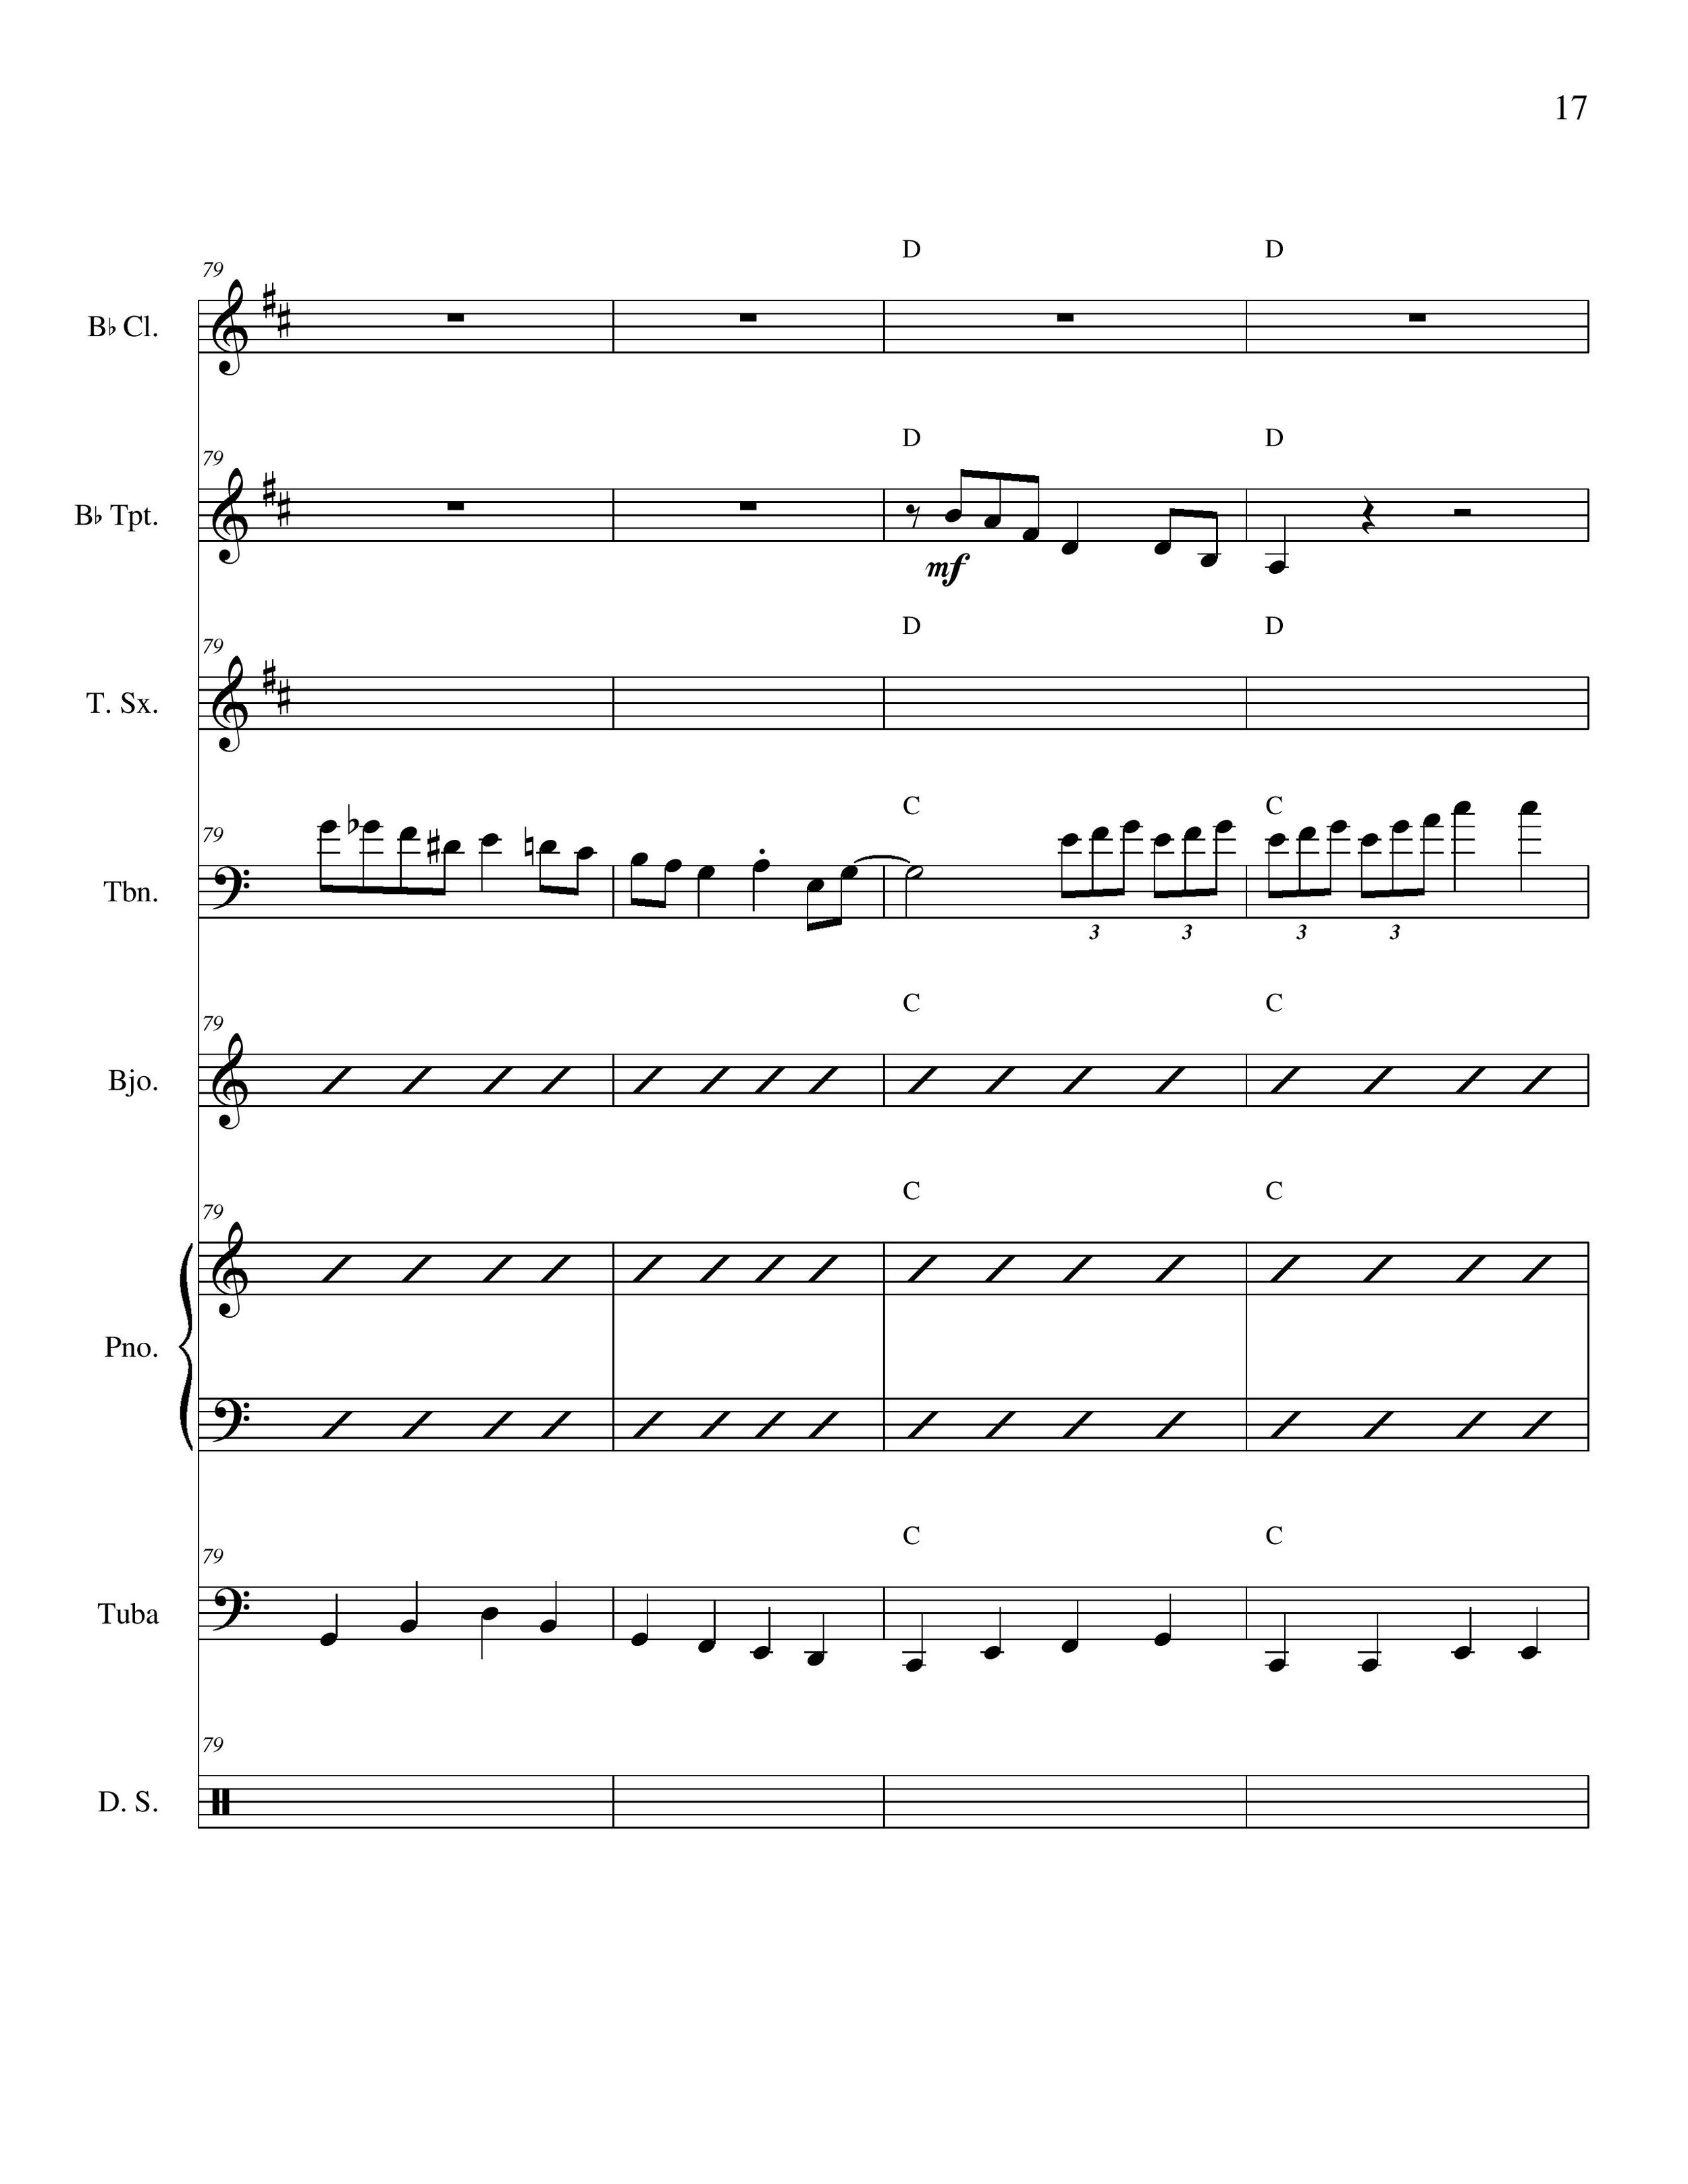 Rudolph the Red-Nosed Reindeer - Score_17.jpg